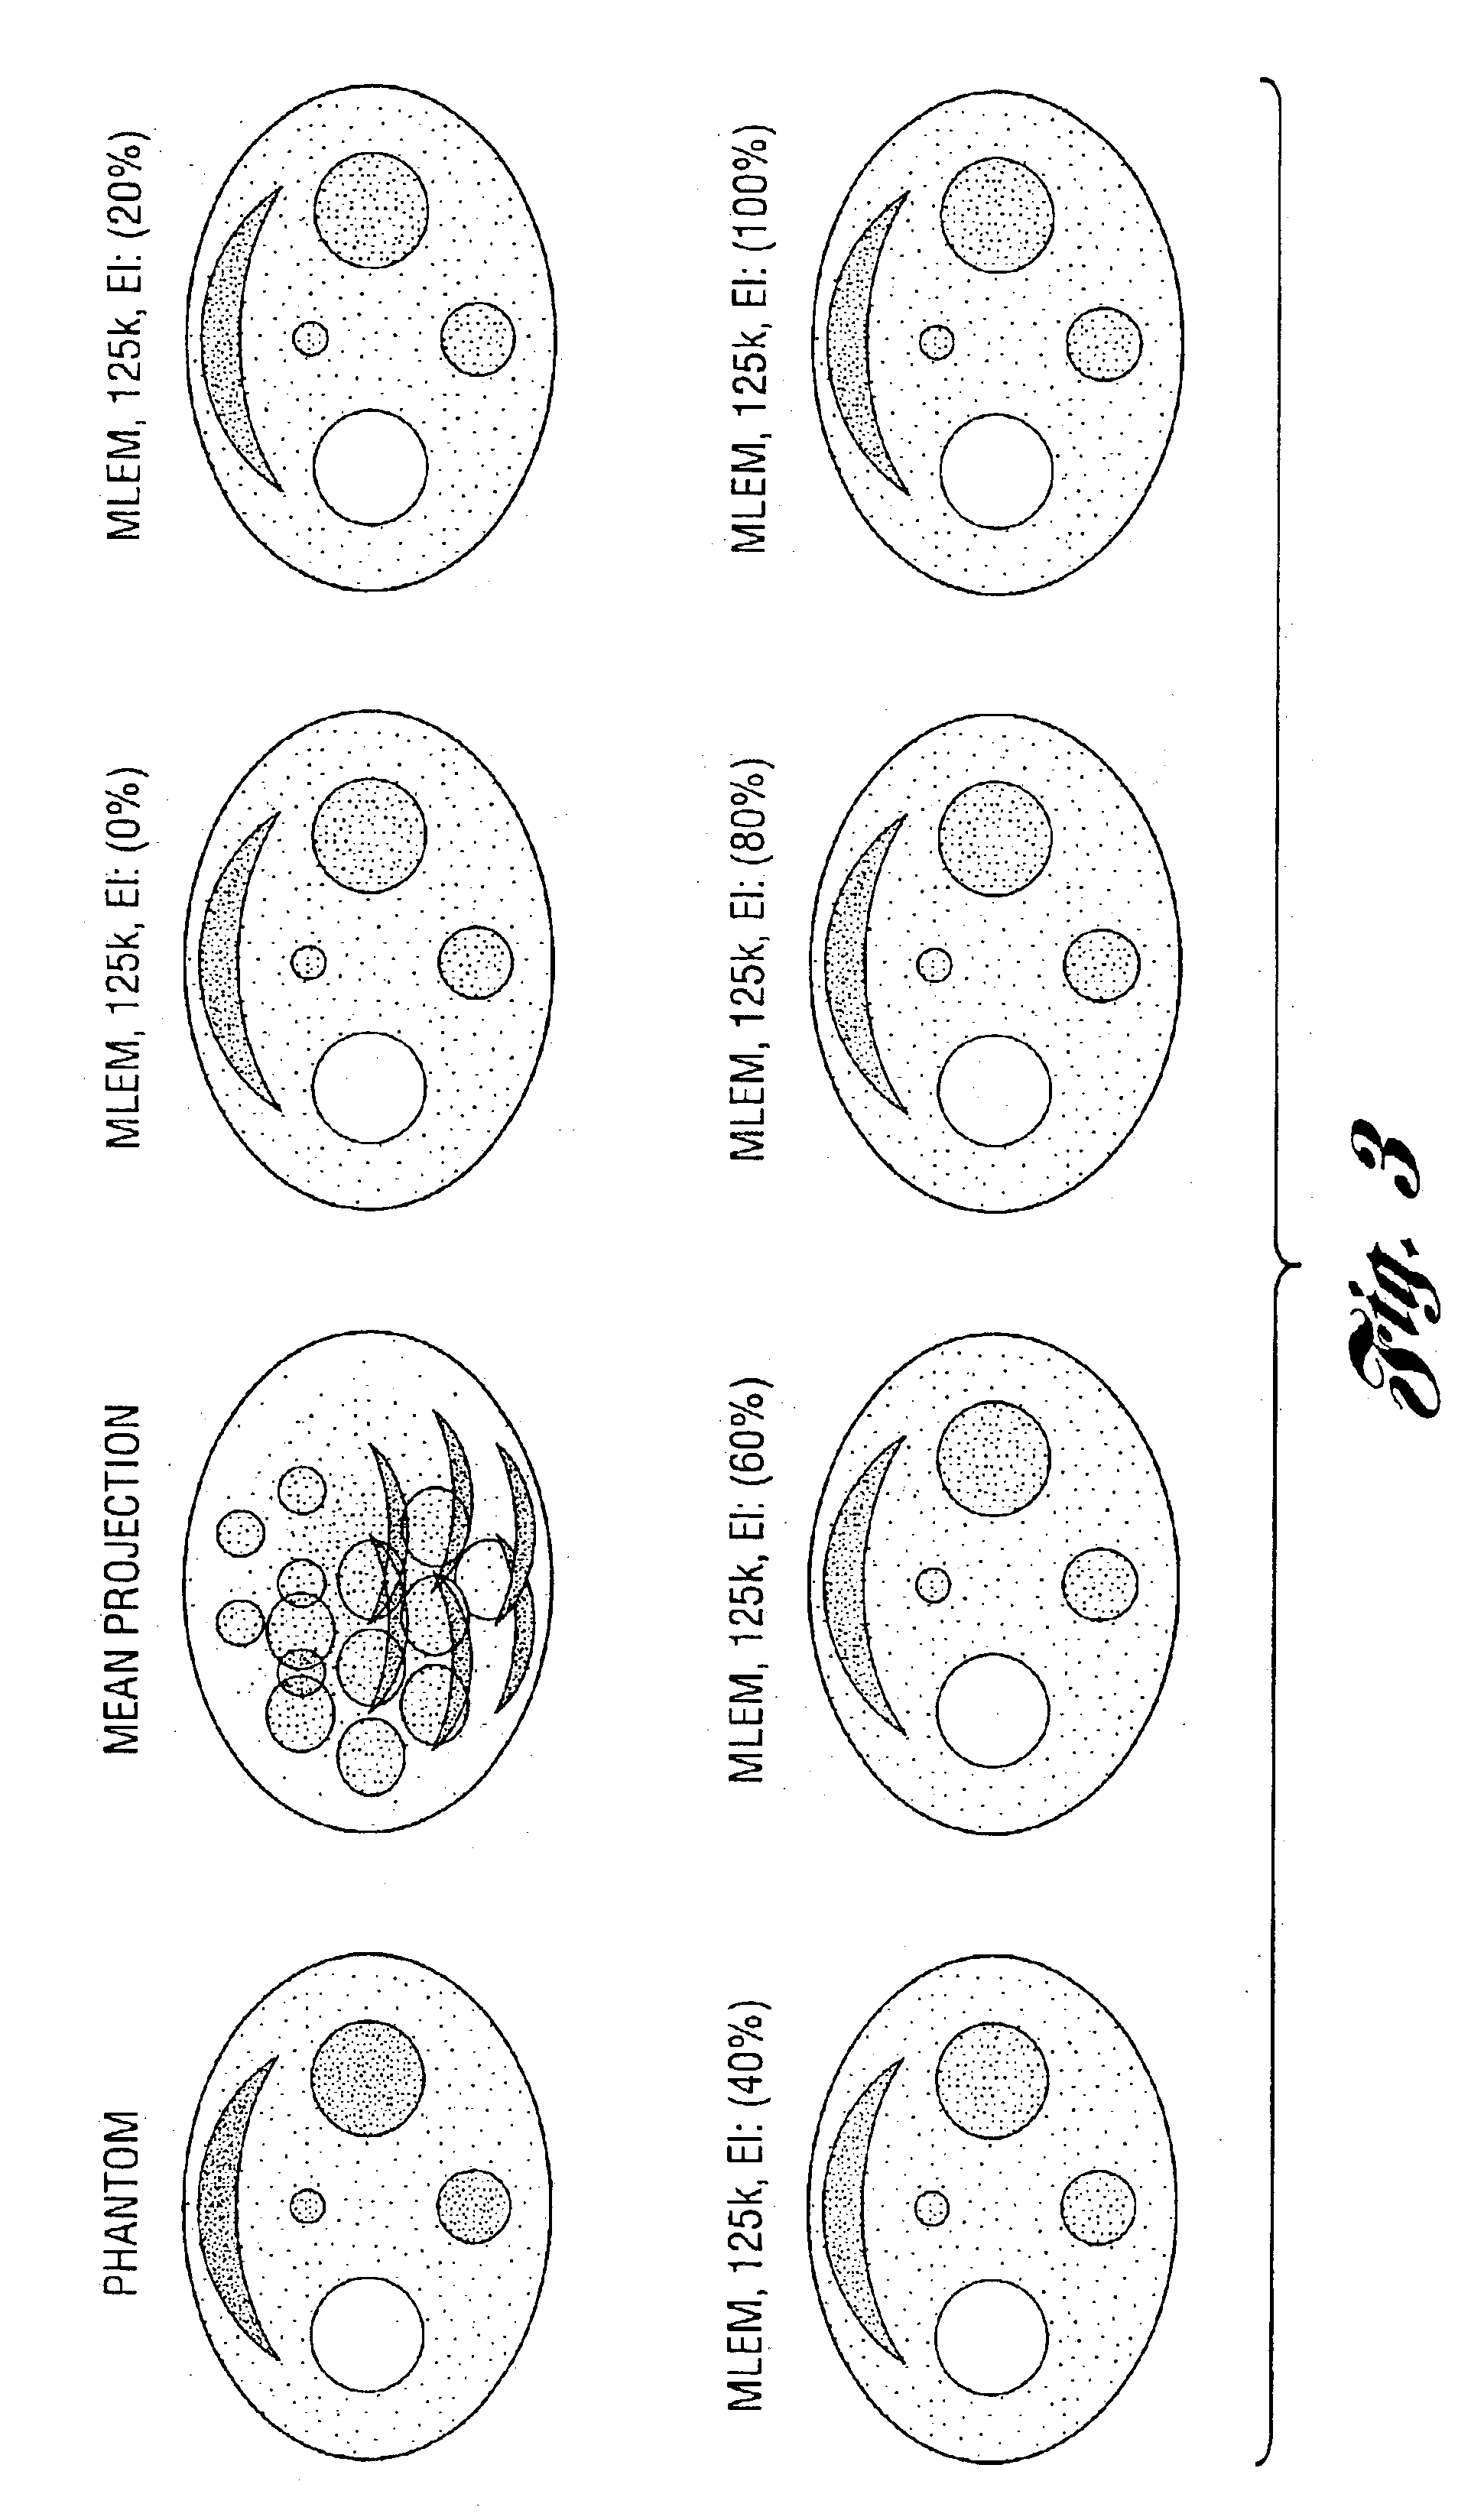 Method and system for generating an image of the radiation density of a source of photons located in an object